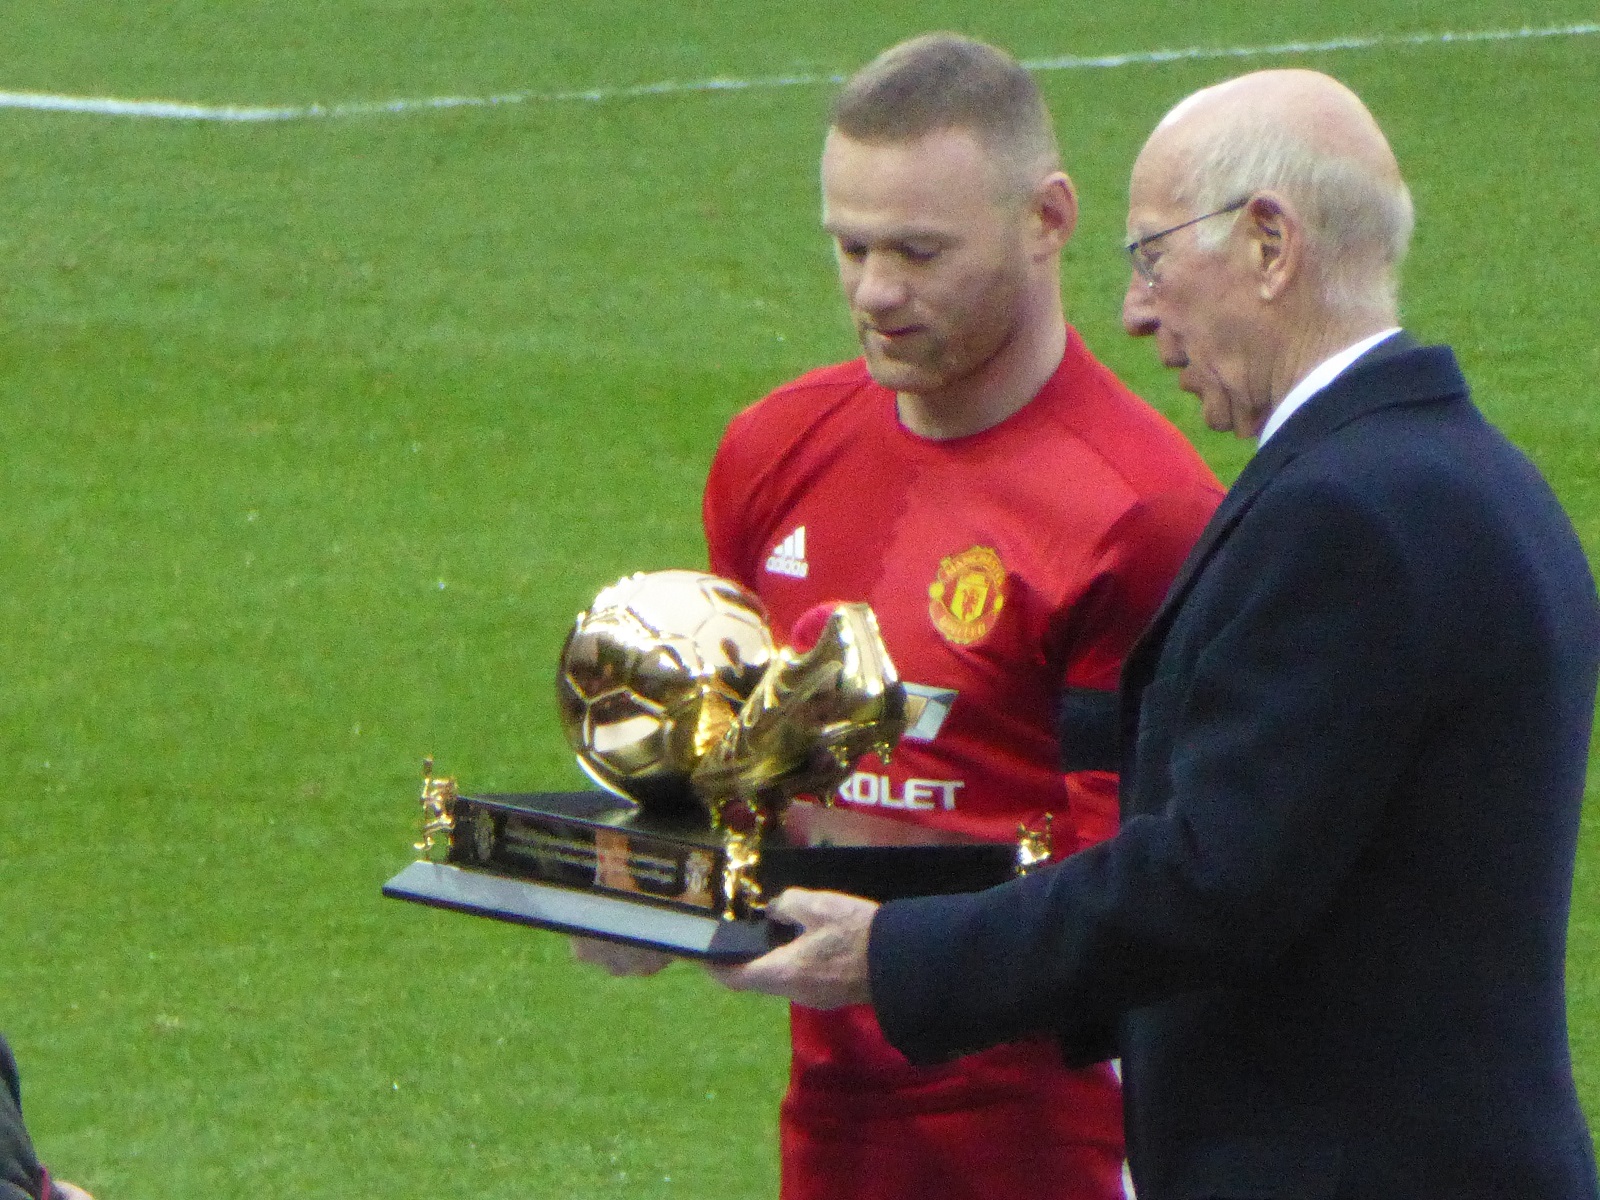 Rooney receiving an award for becoming Manchester United's record goalscorer from previous record holder Sir Bobby Charlton in January 2017